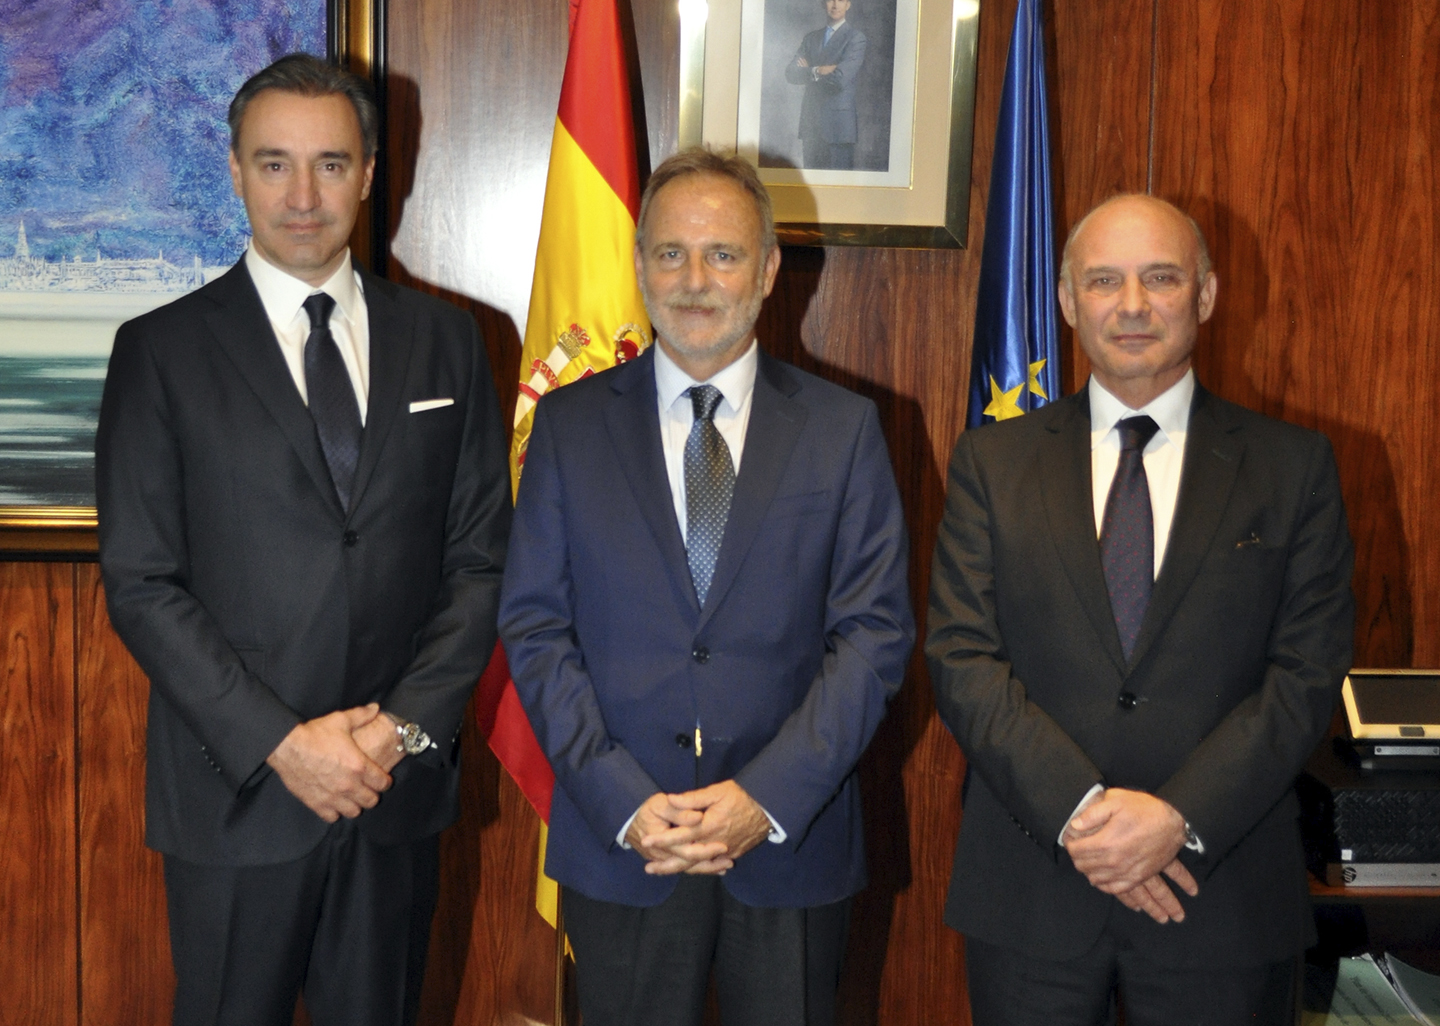 Global Ports Holding’s JV buys remaining share of Malaga Cruise Port concession